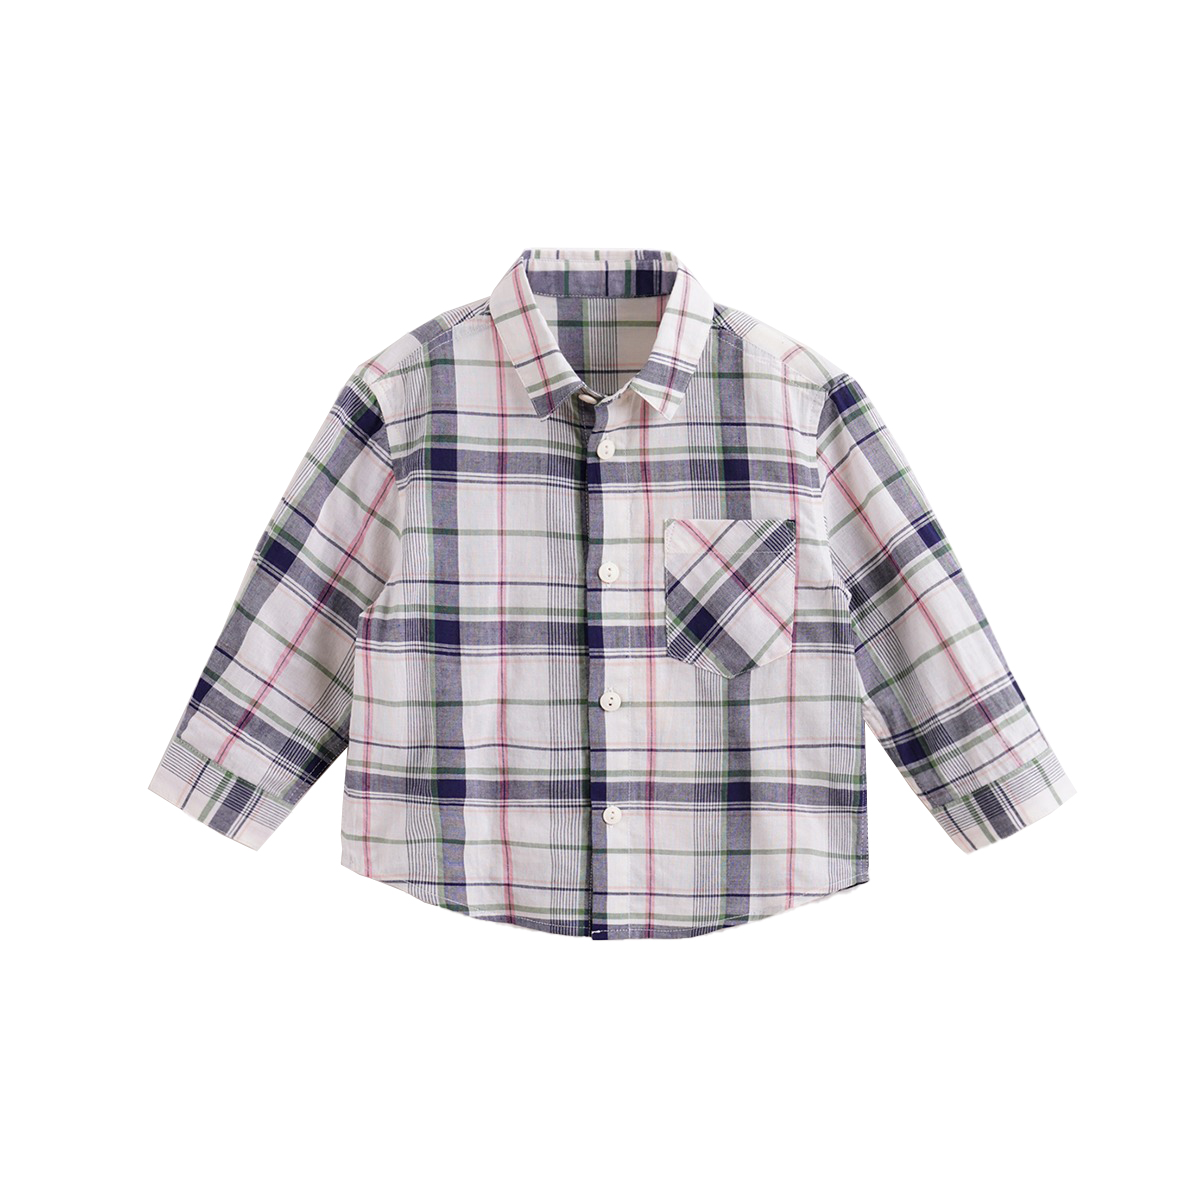 2021 New Baby Spring One Pocket Letters Printed Long-sleeved Check Boys Shirt